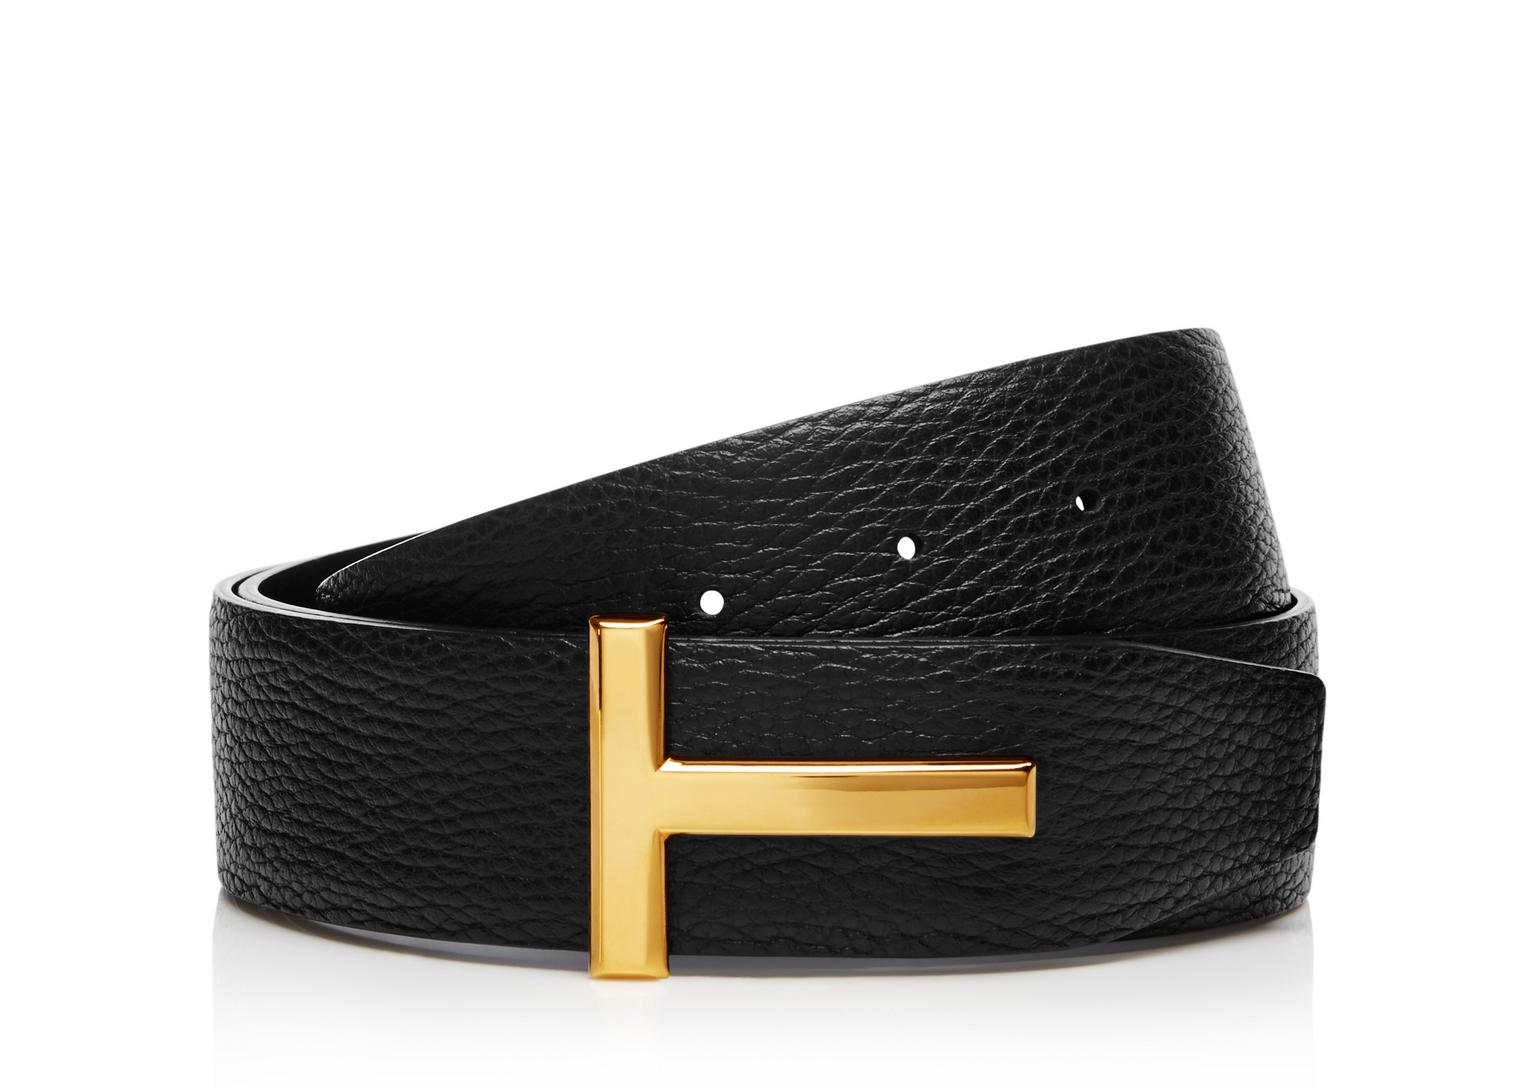 Discover men’s belt by Tom Ford | Perfume and Beauty magazine